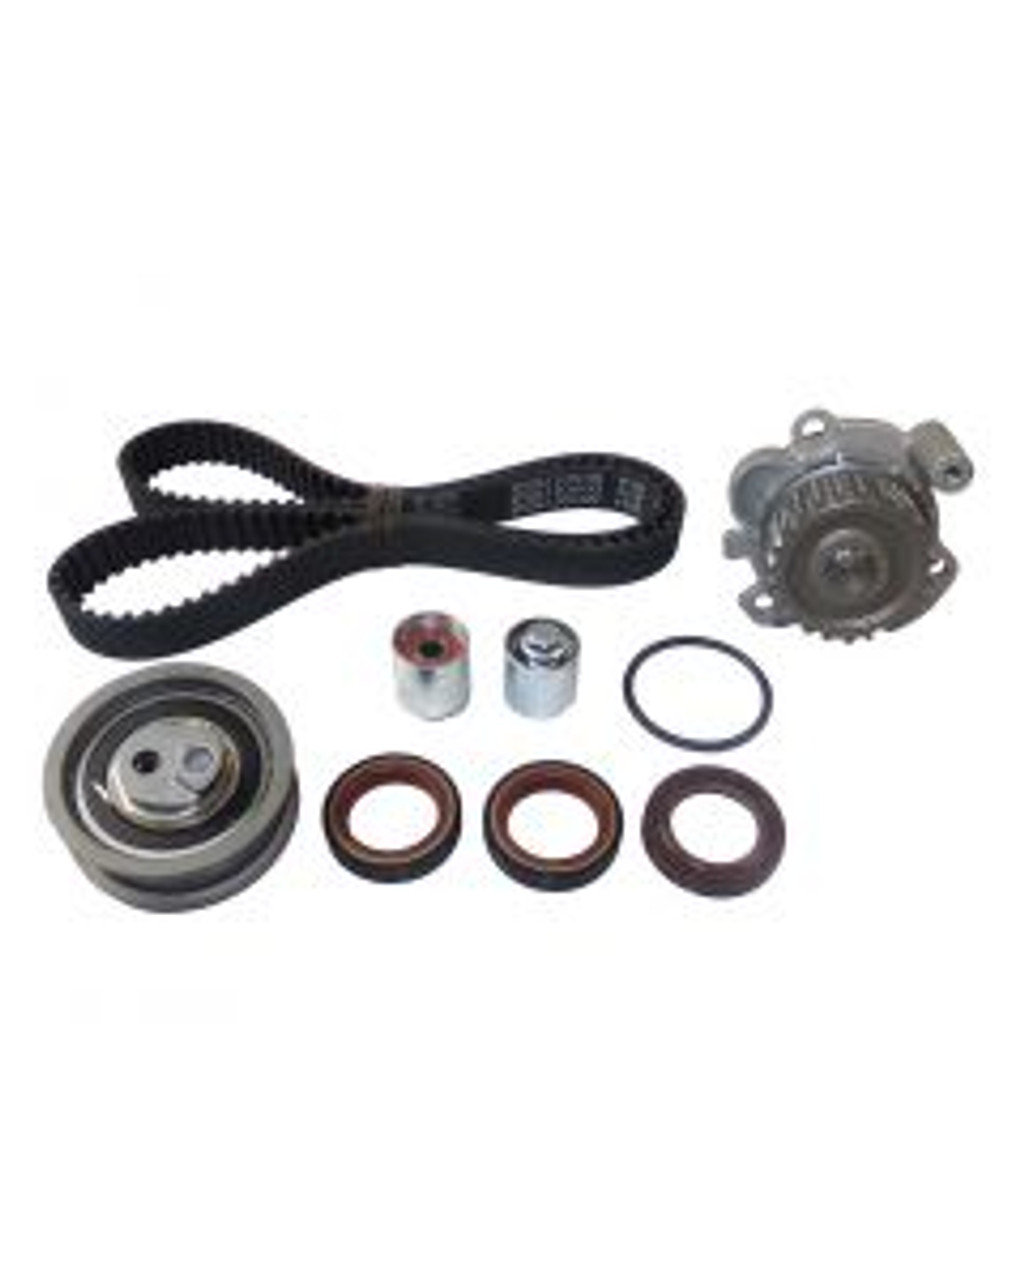 2007 Audi A3 2.0L Timing Belt Kit with Water Pump TBK802WP.E2